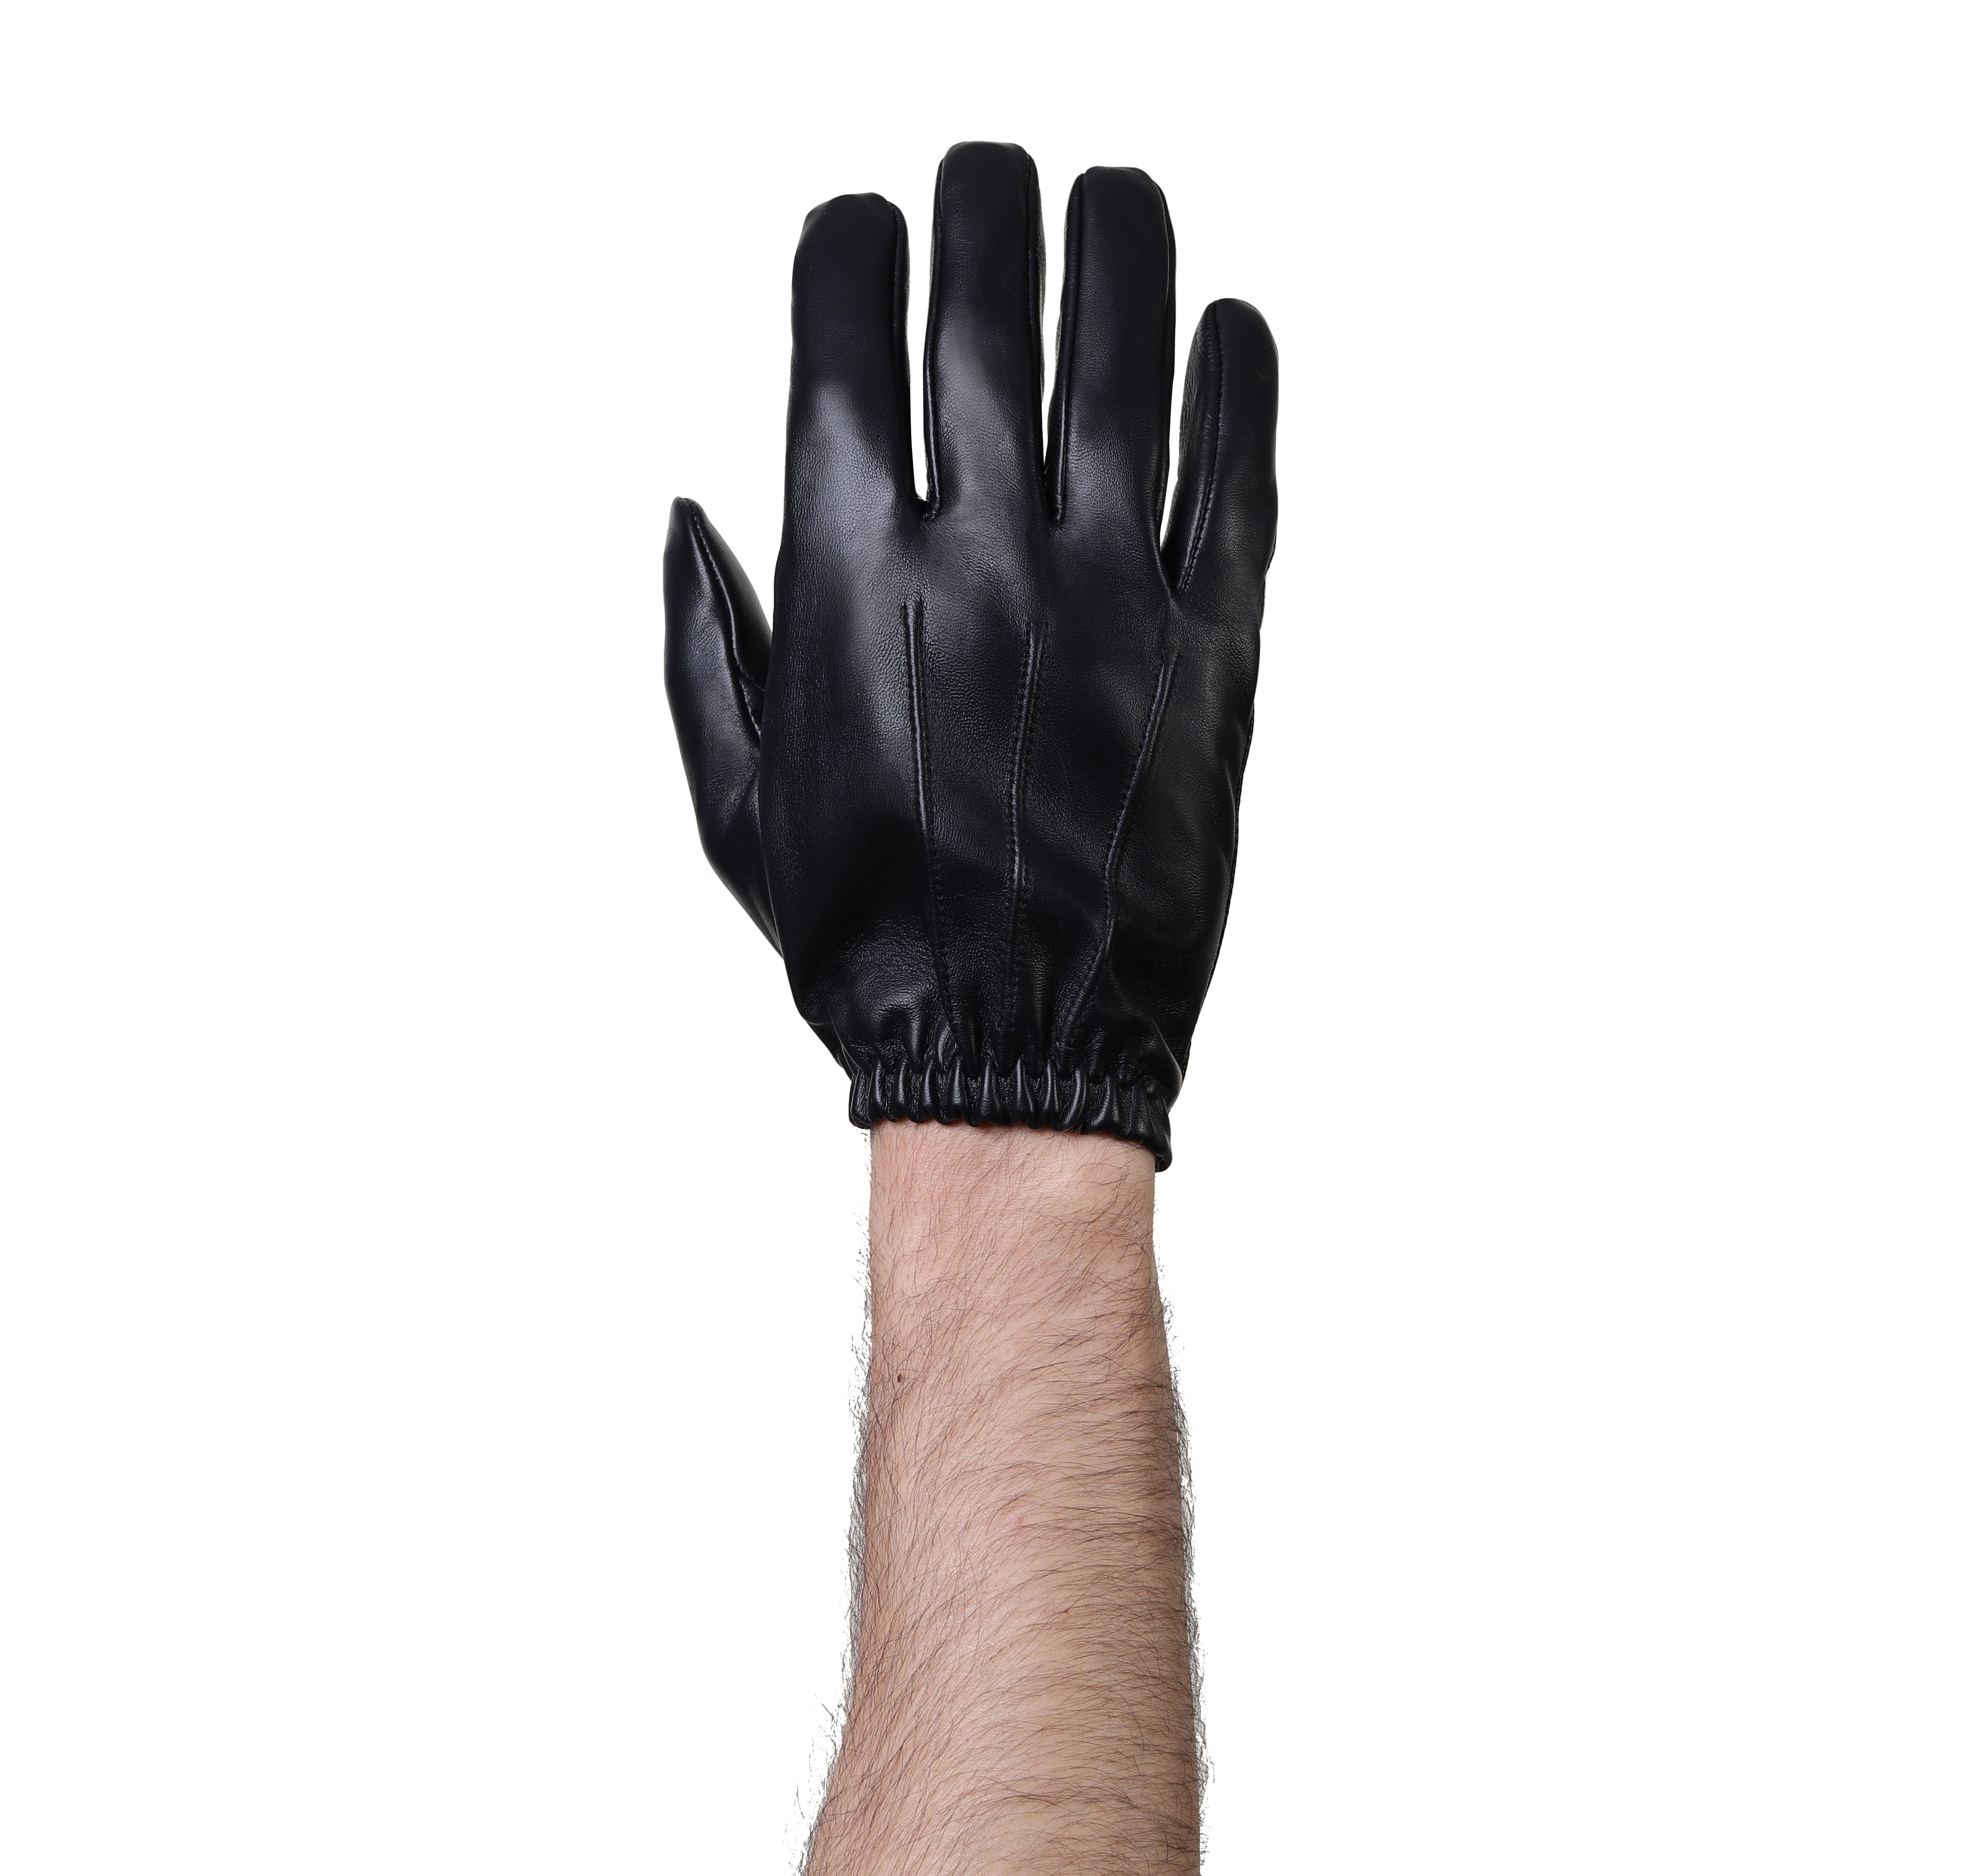 Asfalto Unlined Leather Gloves for Men